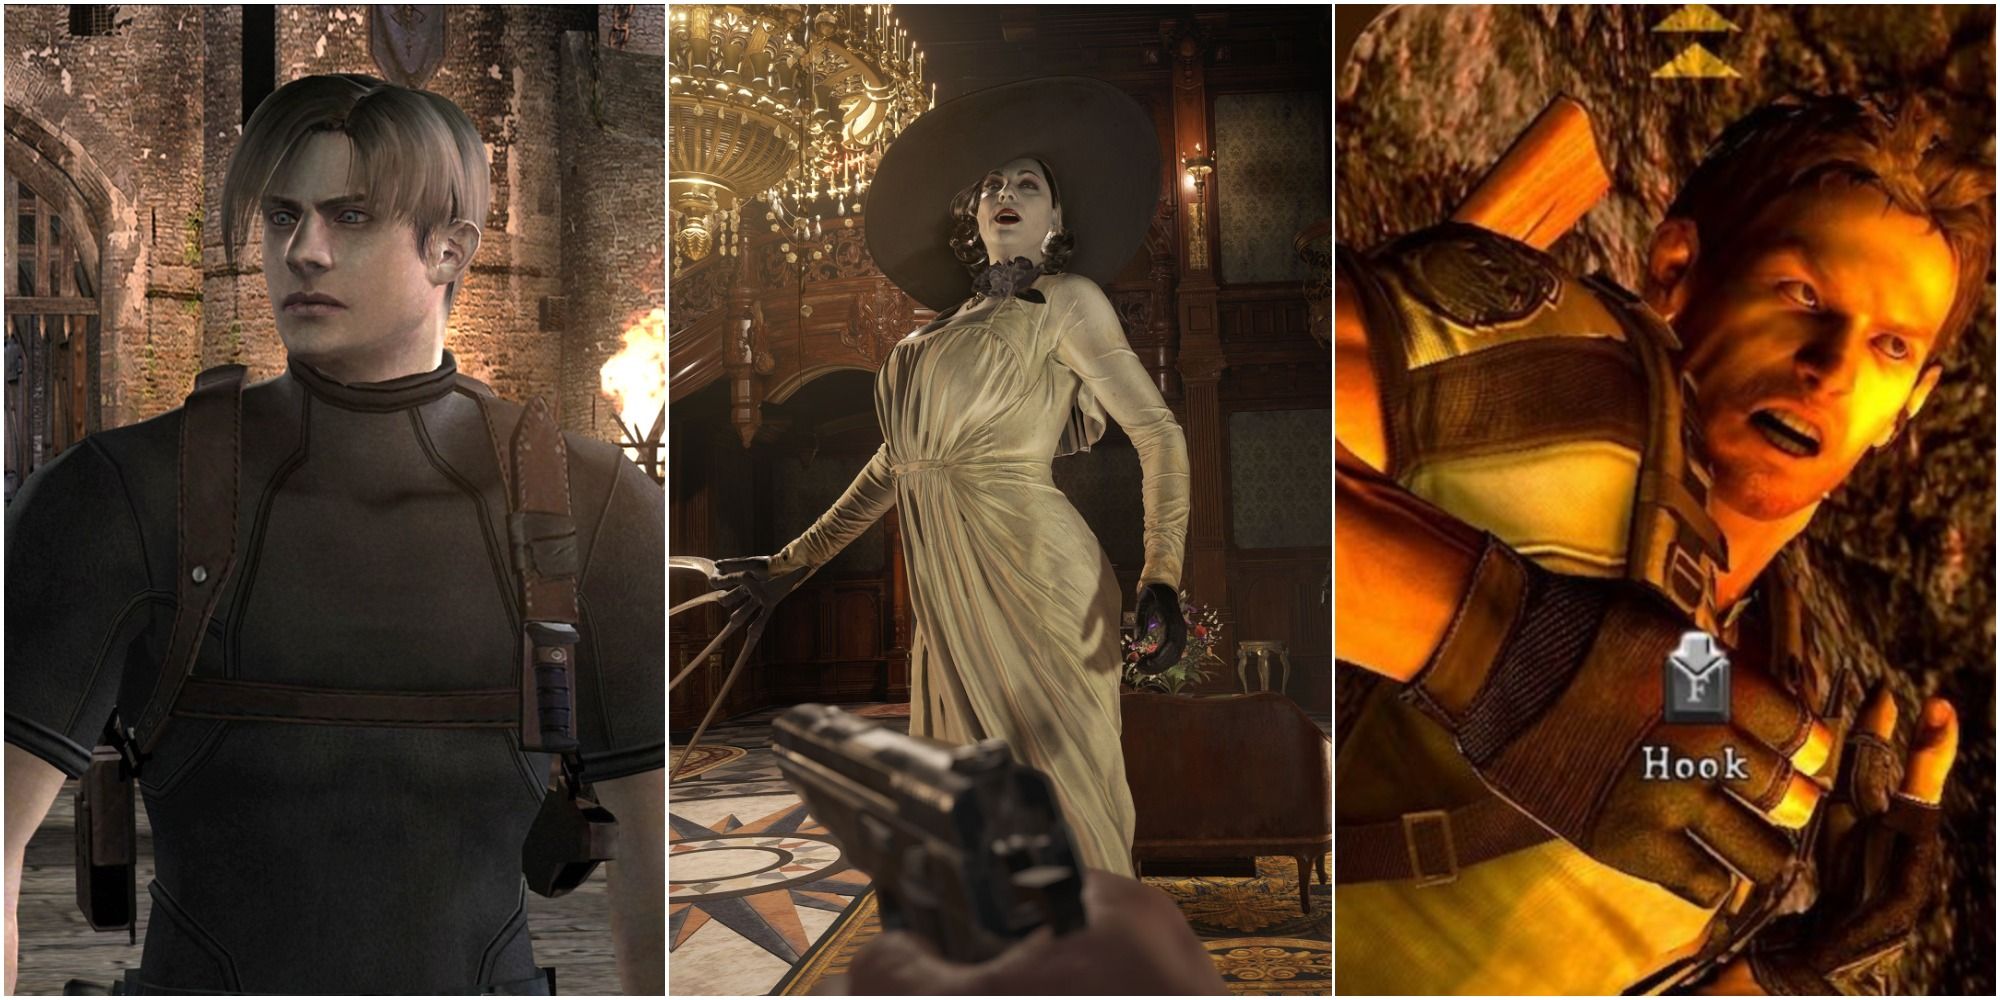 From left: A screenshot of Leon Kennedy from RE4, screenshot of Lady Dimitrescu from RE8, screenshot of Chris Redfield from RE5